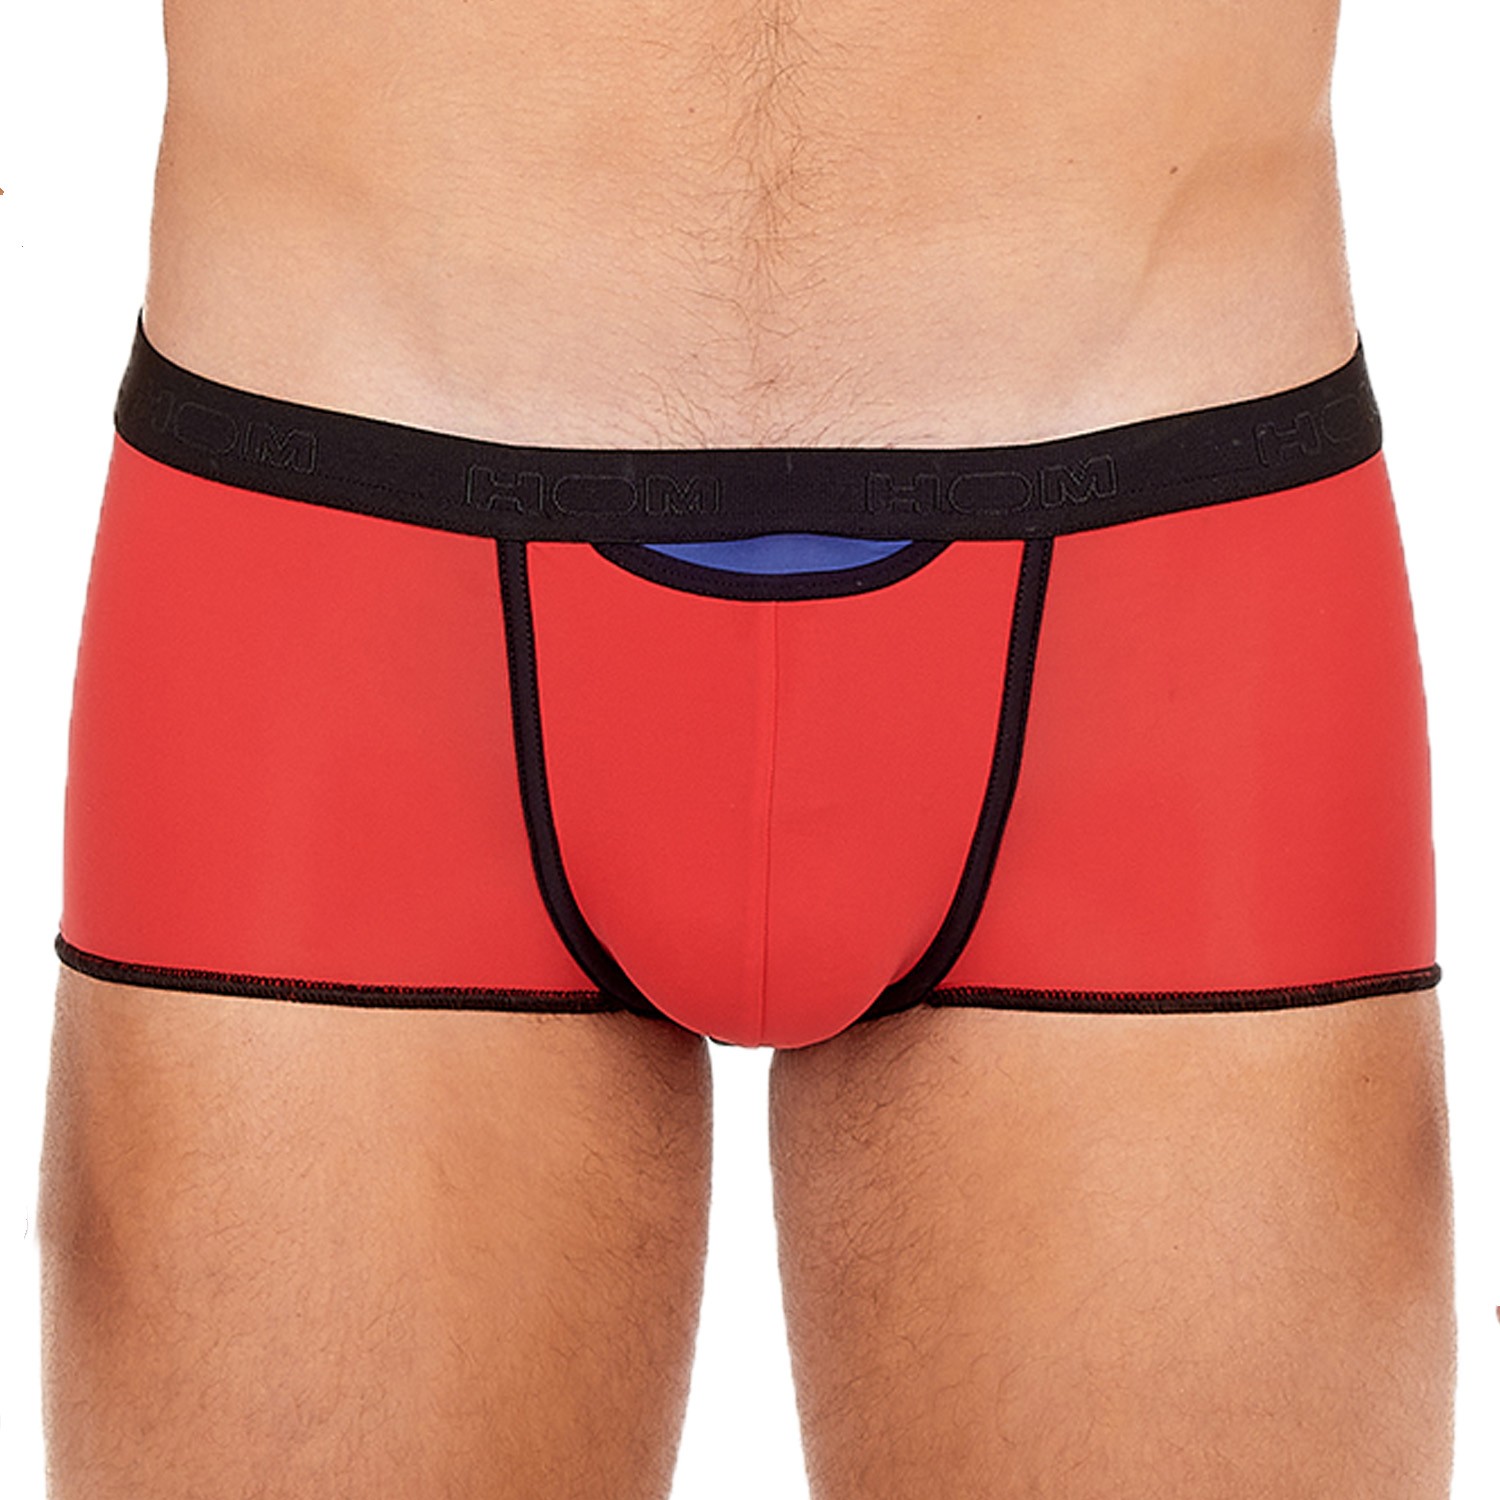 https://www.luniversdelhomme.com/83937/boxer-short-ho1-feather-up-limited-edition-red.jpg